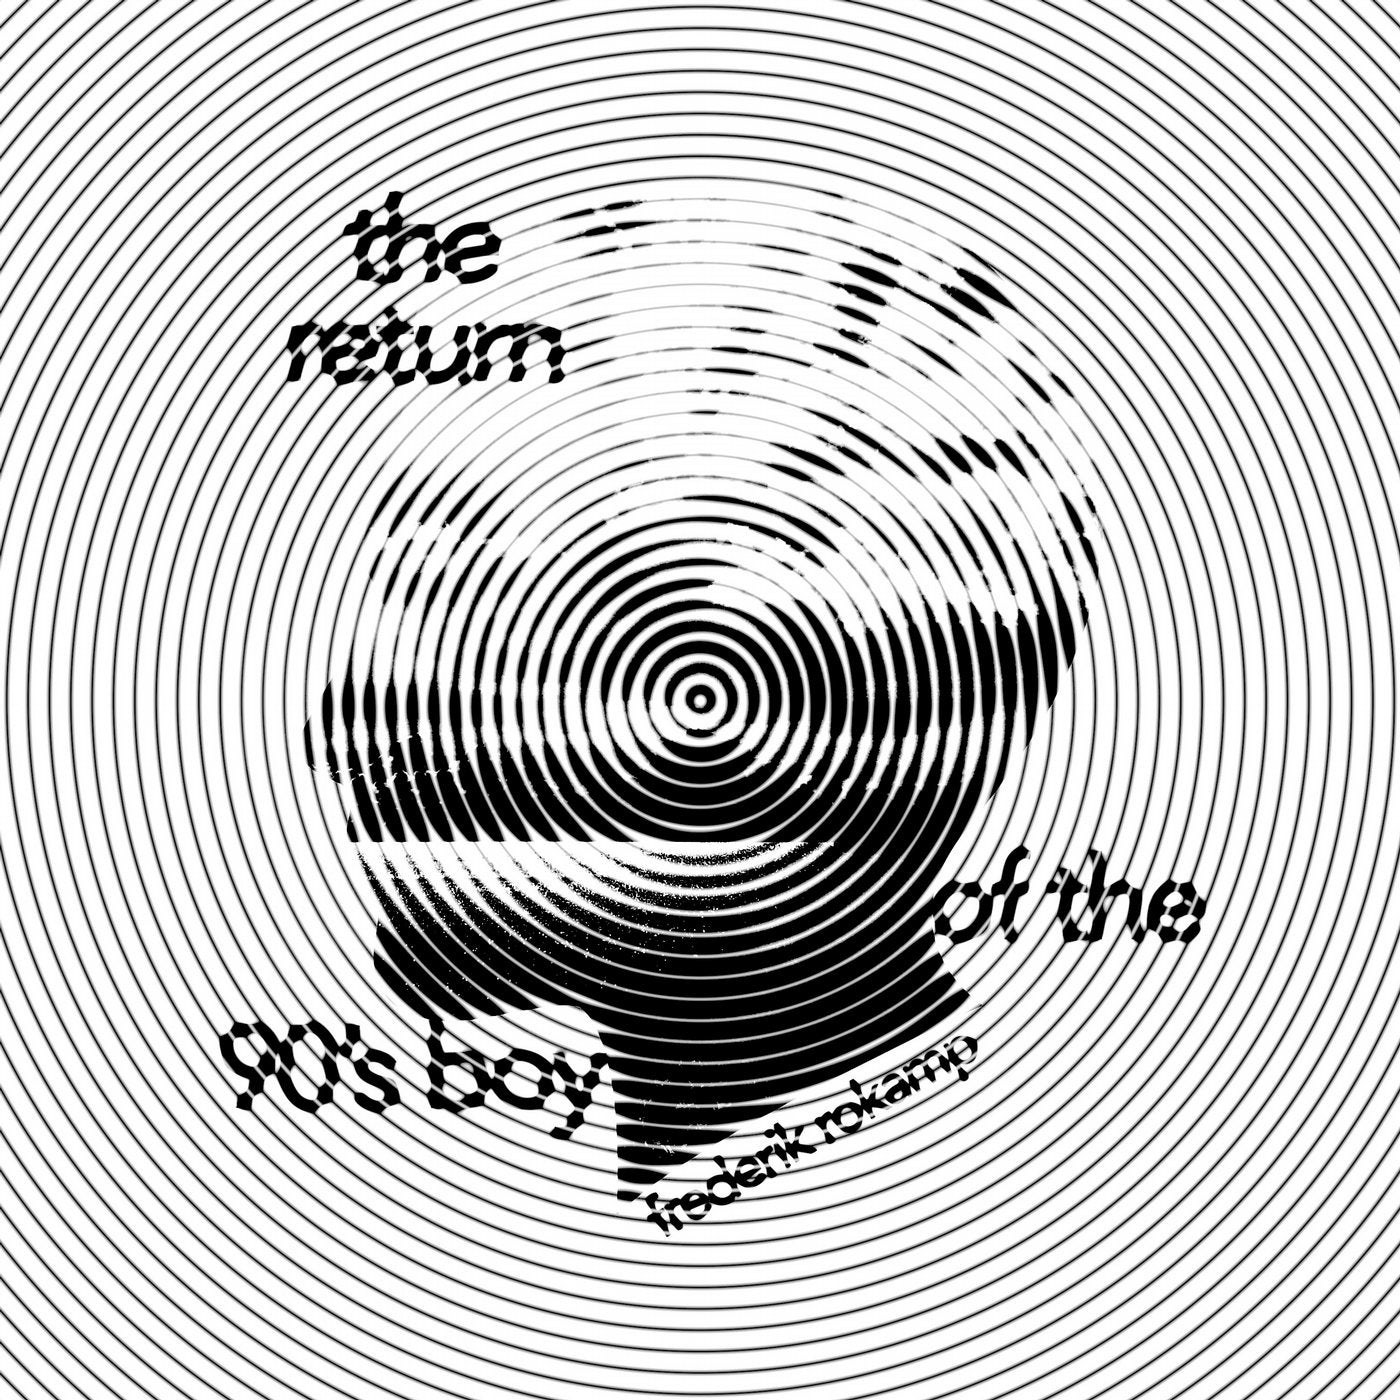 The Return of the 90's Boy